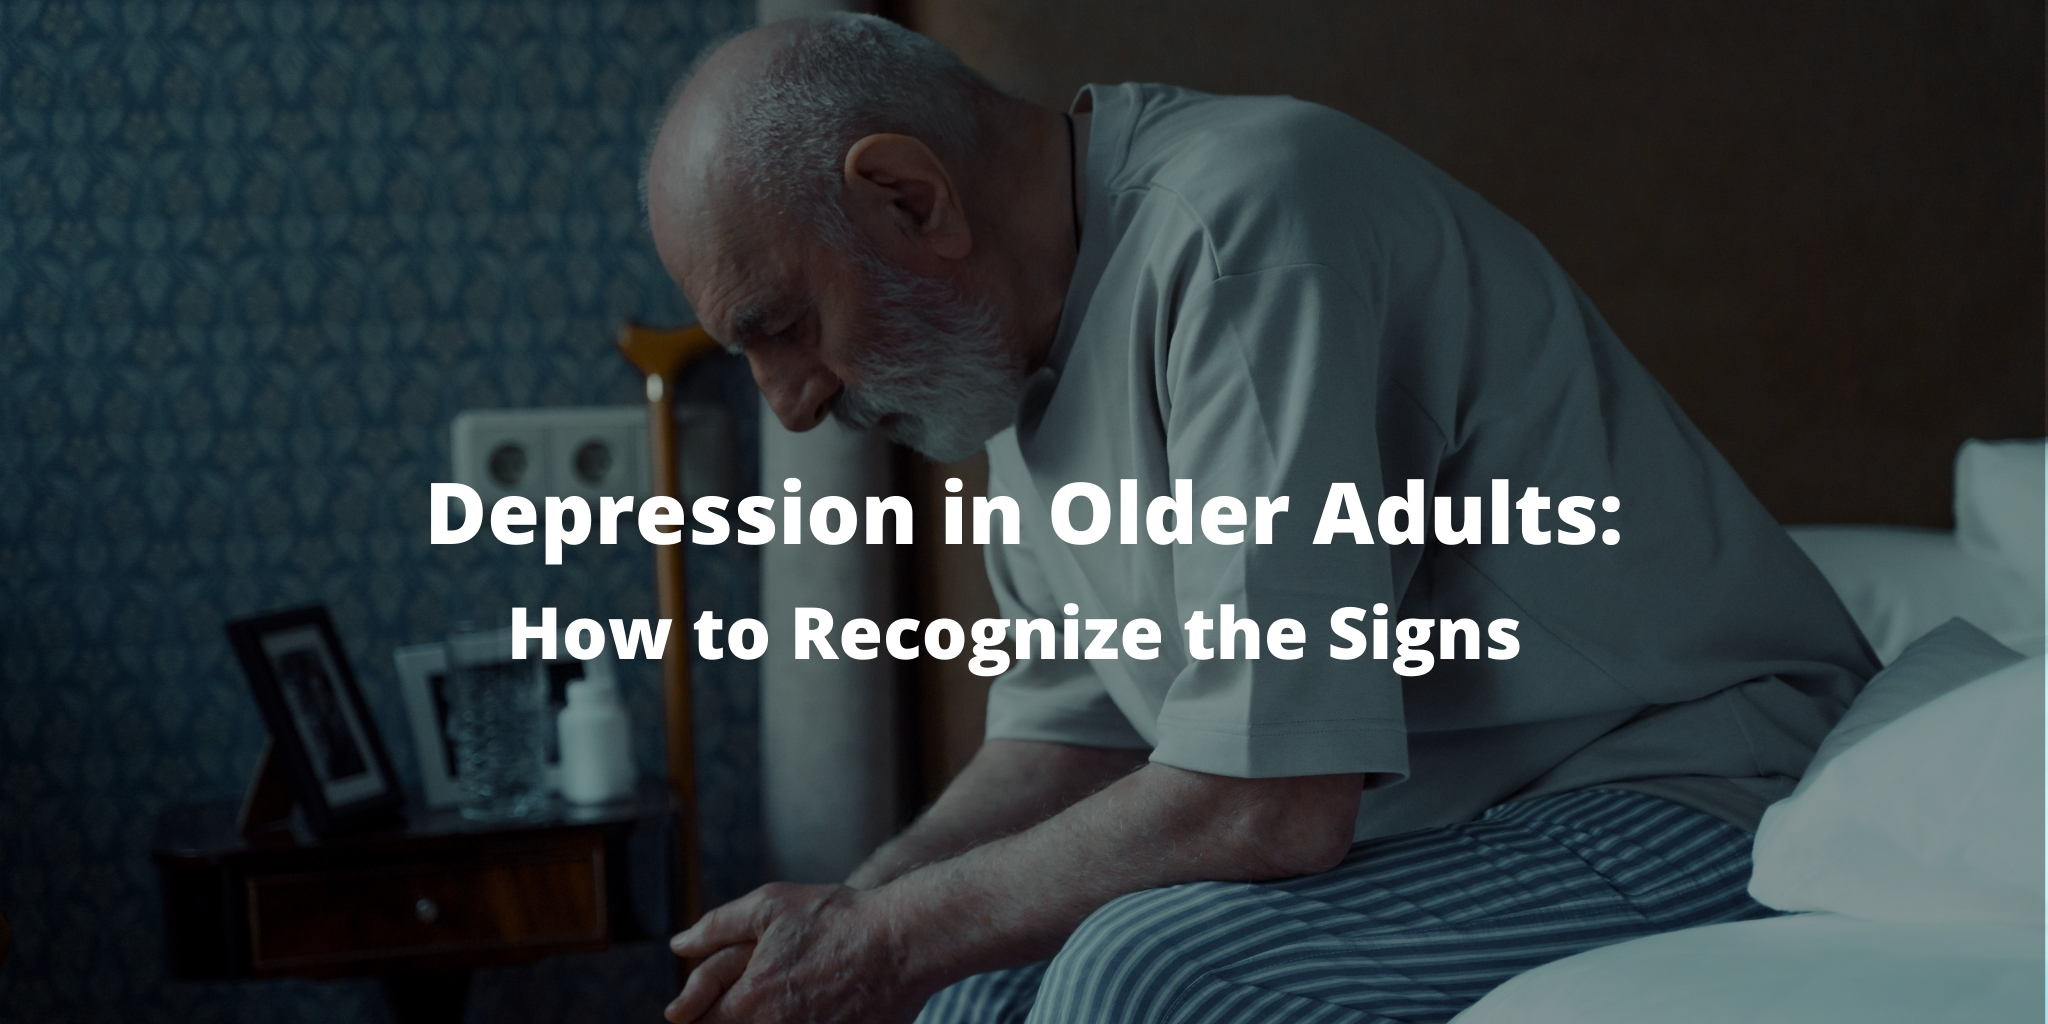 Depression in Older Adults: How to Recognize the Signs